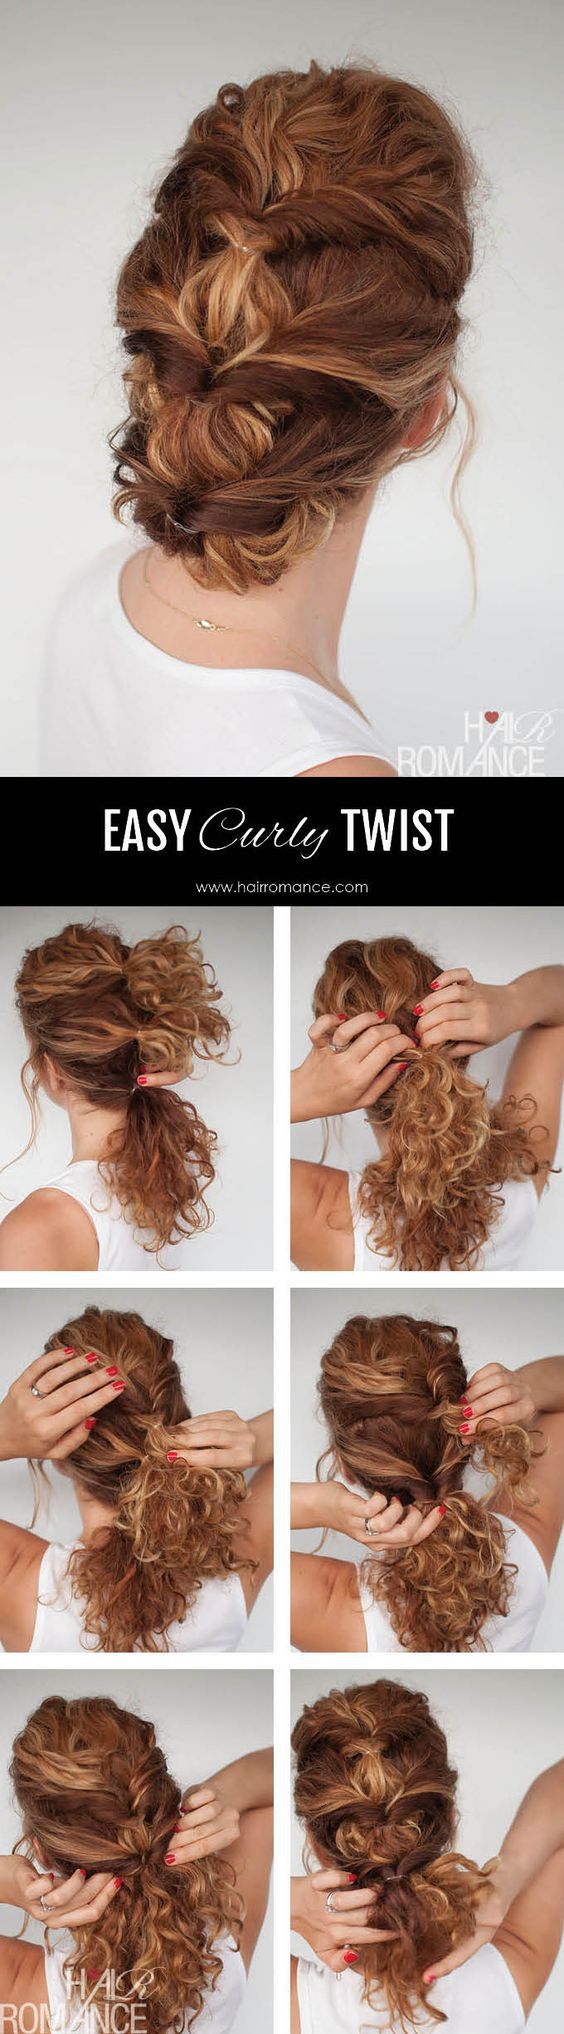 Adorably Easy Updos For Curly Hair | CurlyHair.com